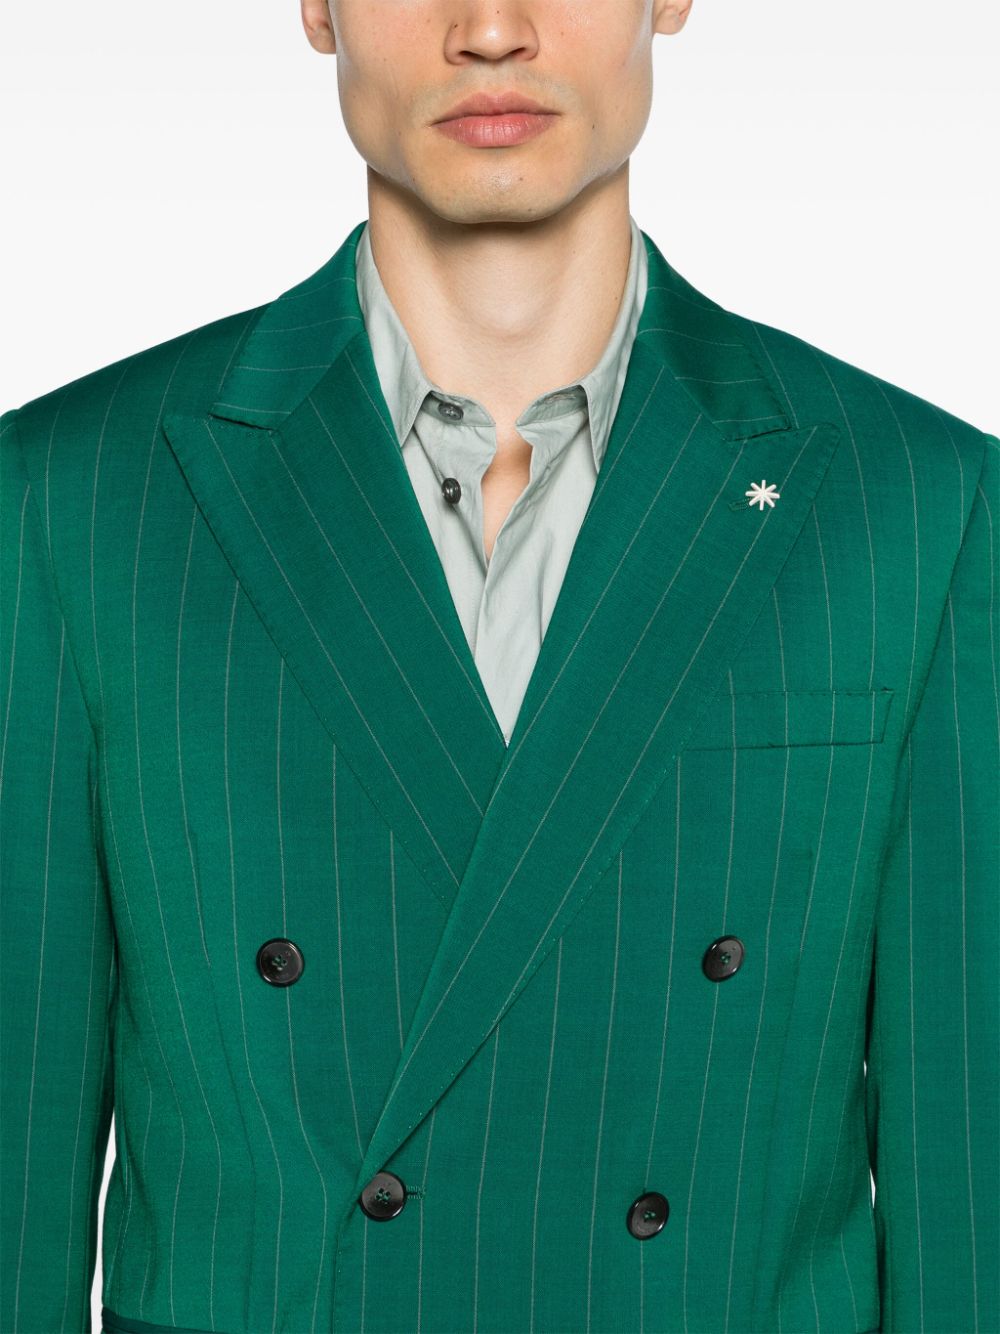 Green double-breasted pinstripe suit